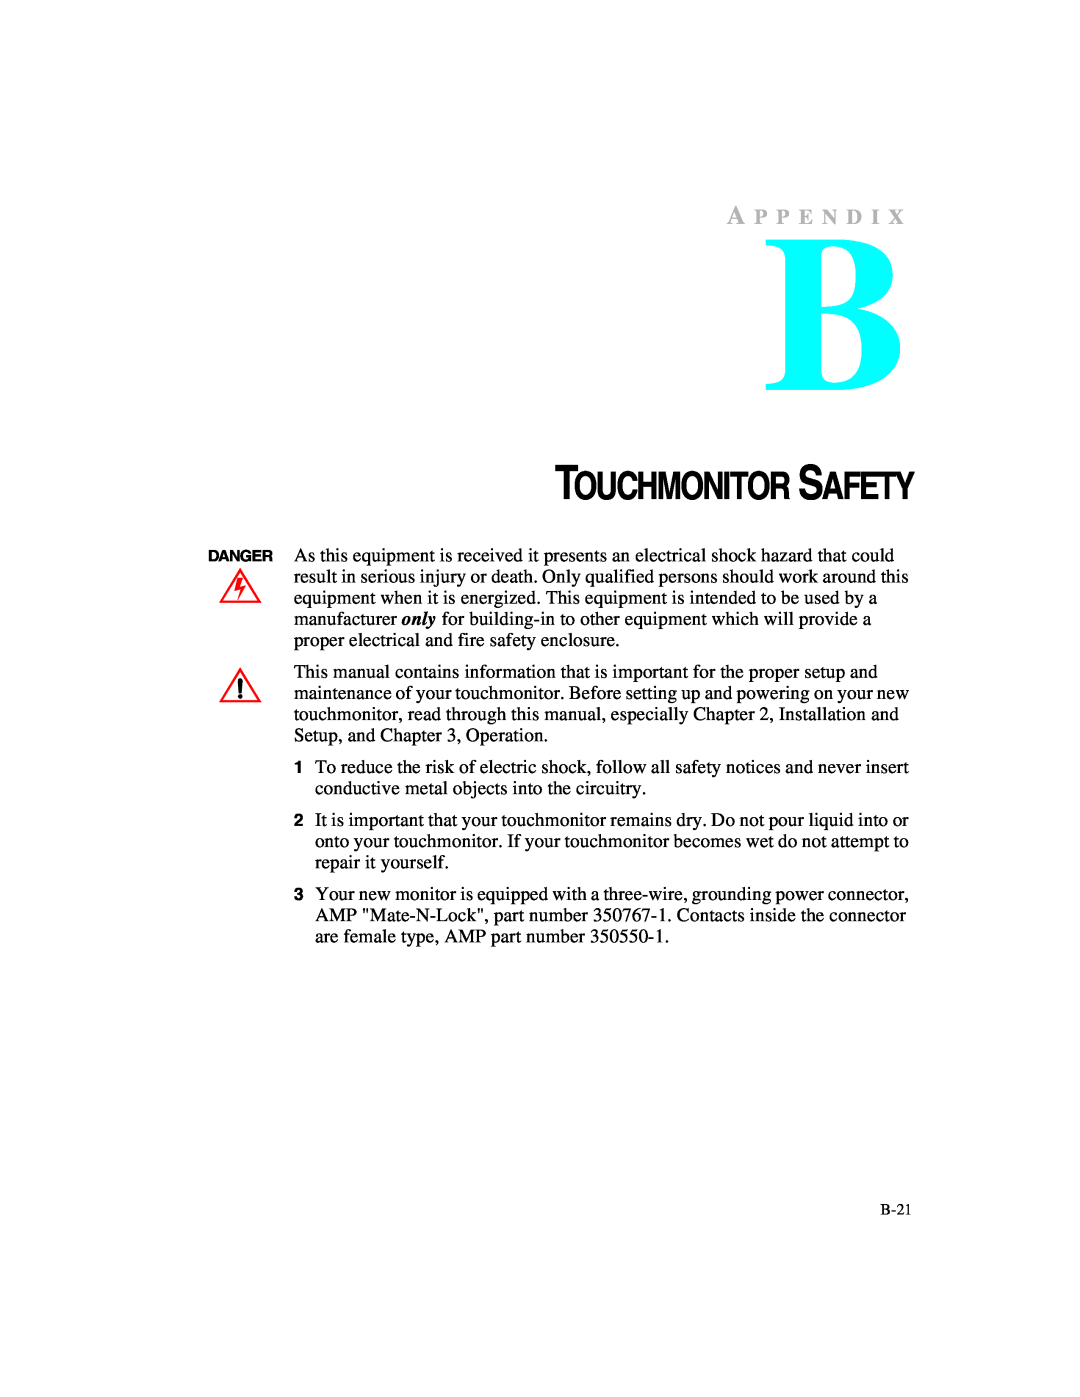 Elo TouchSystems ET1X45C-4UWE-1, ET1X45C-4SWE-1 manual Touchmonitor Safety, A P P E N D I 